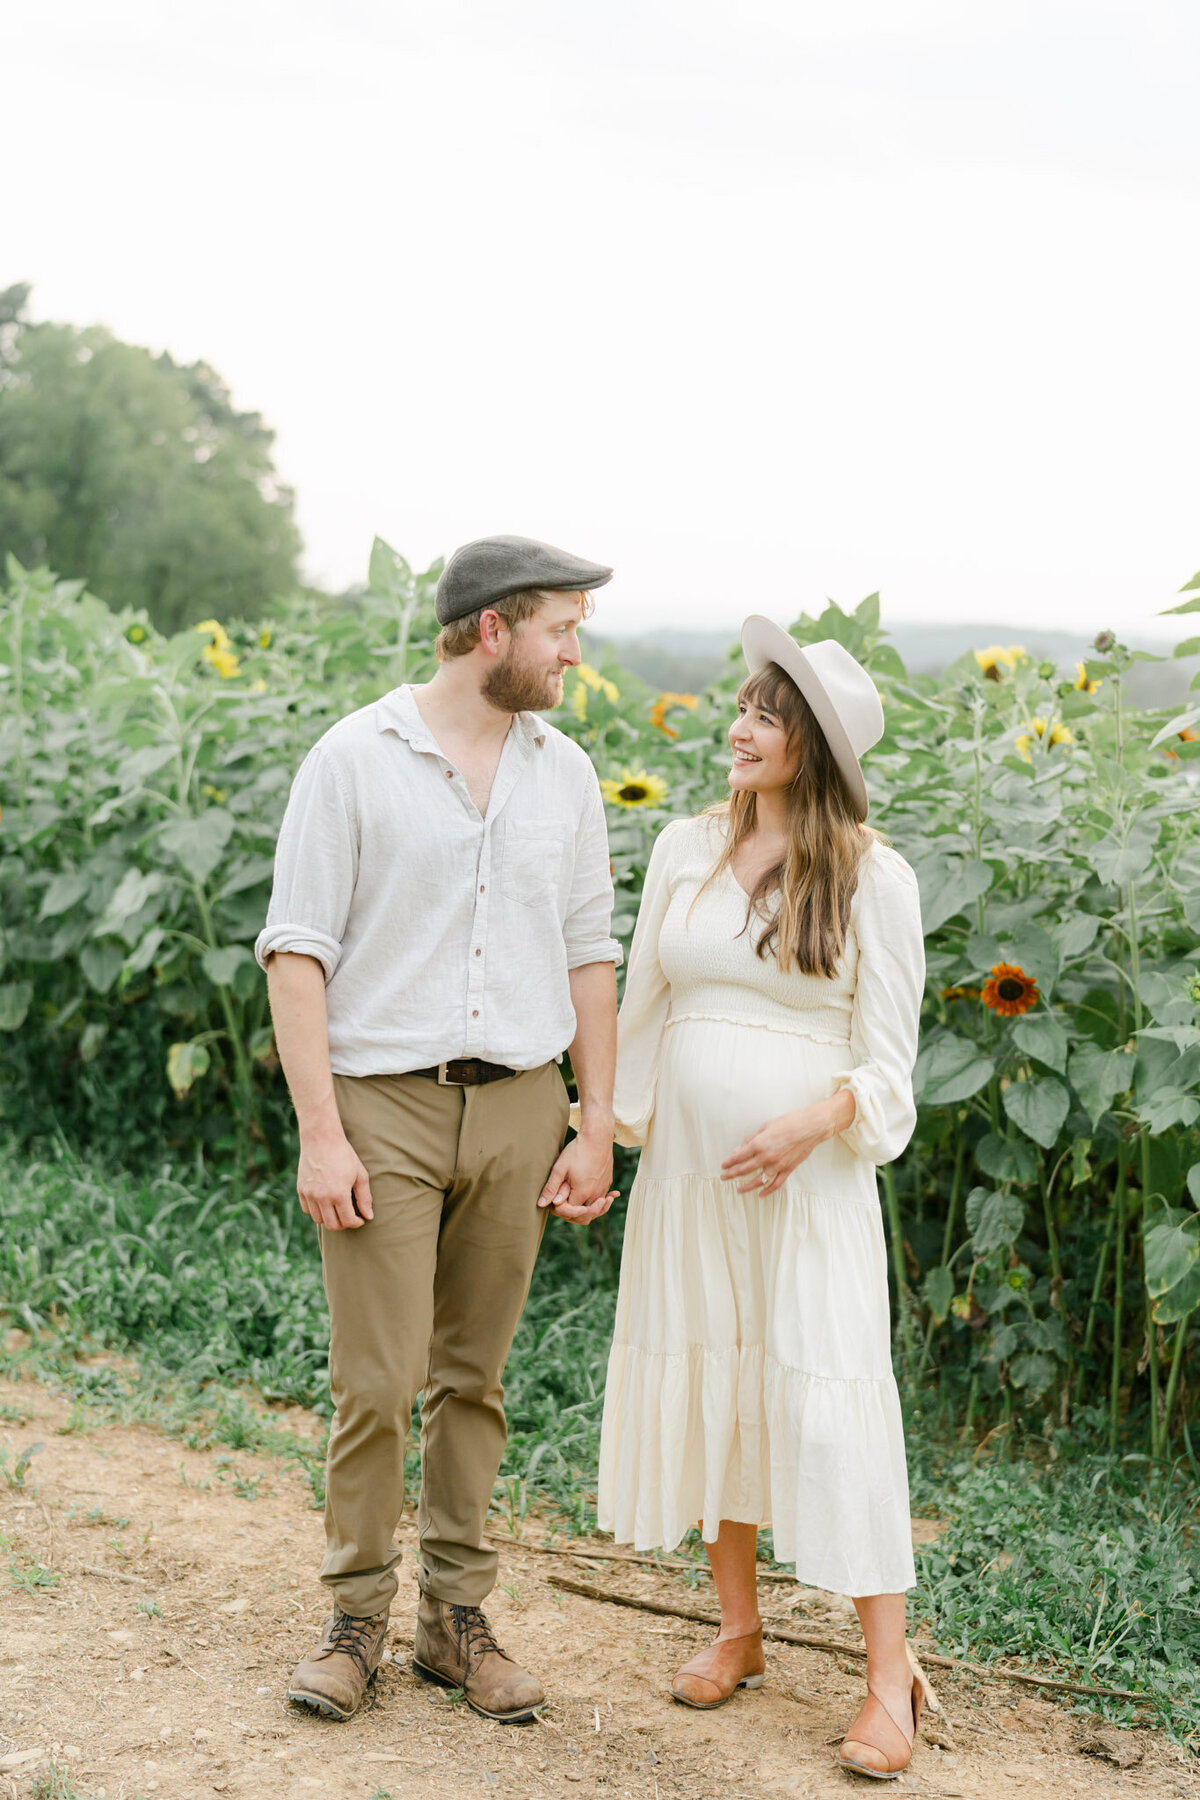 pregnant women holds husband's hands in a field of sunflowers.